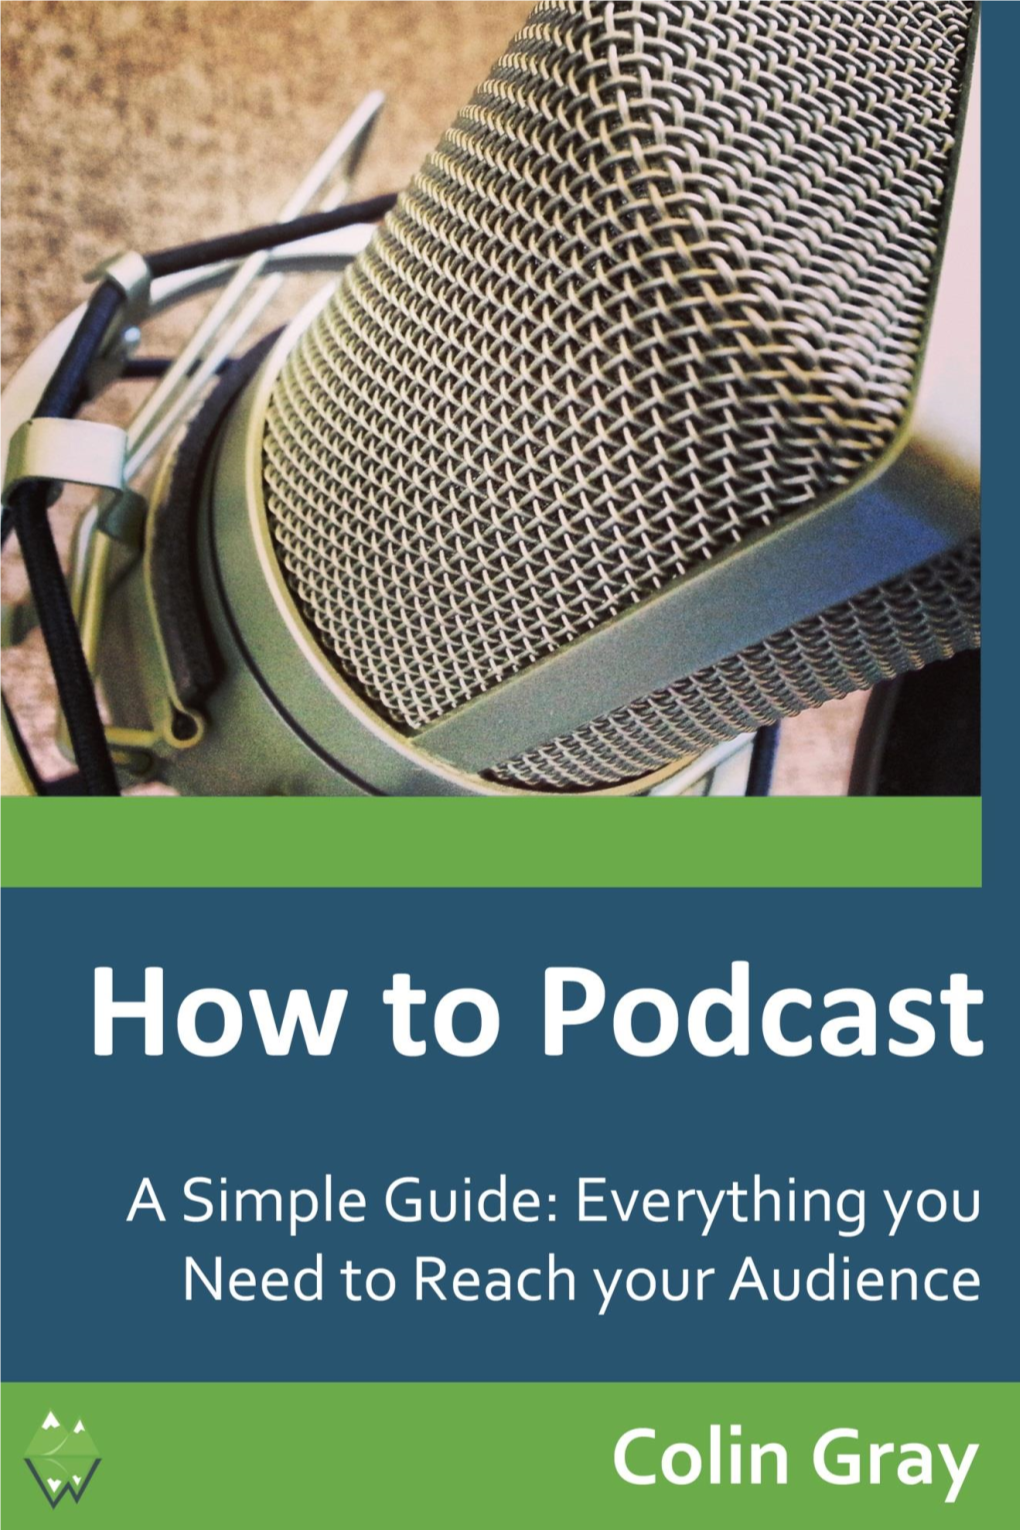 How to Podcast: a Simple Guide